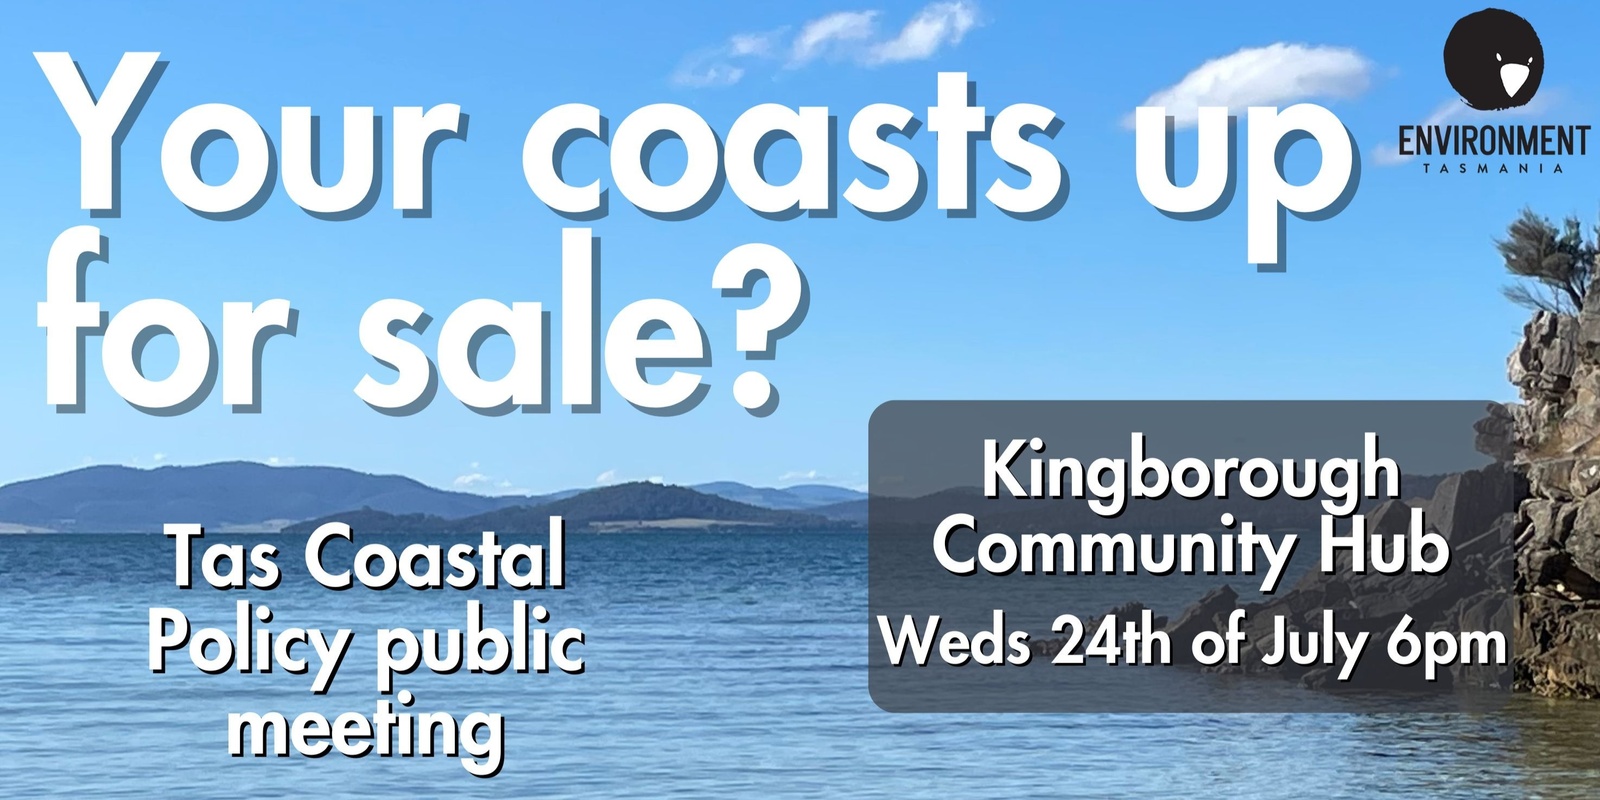 Banner image for Kingston - Your coasts up for sale?